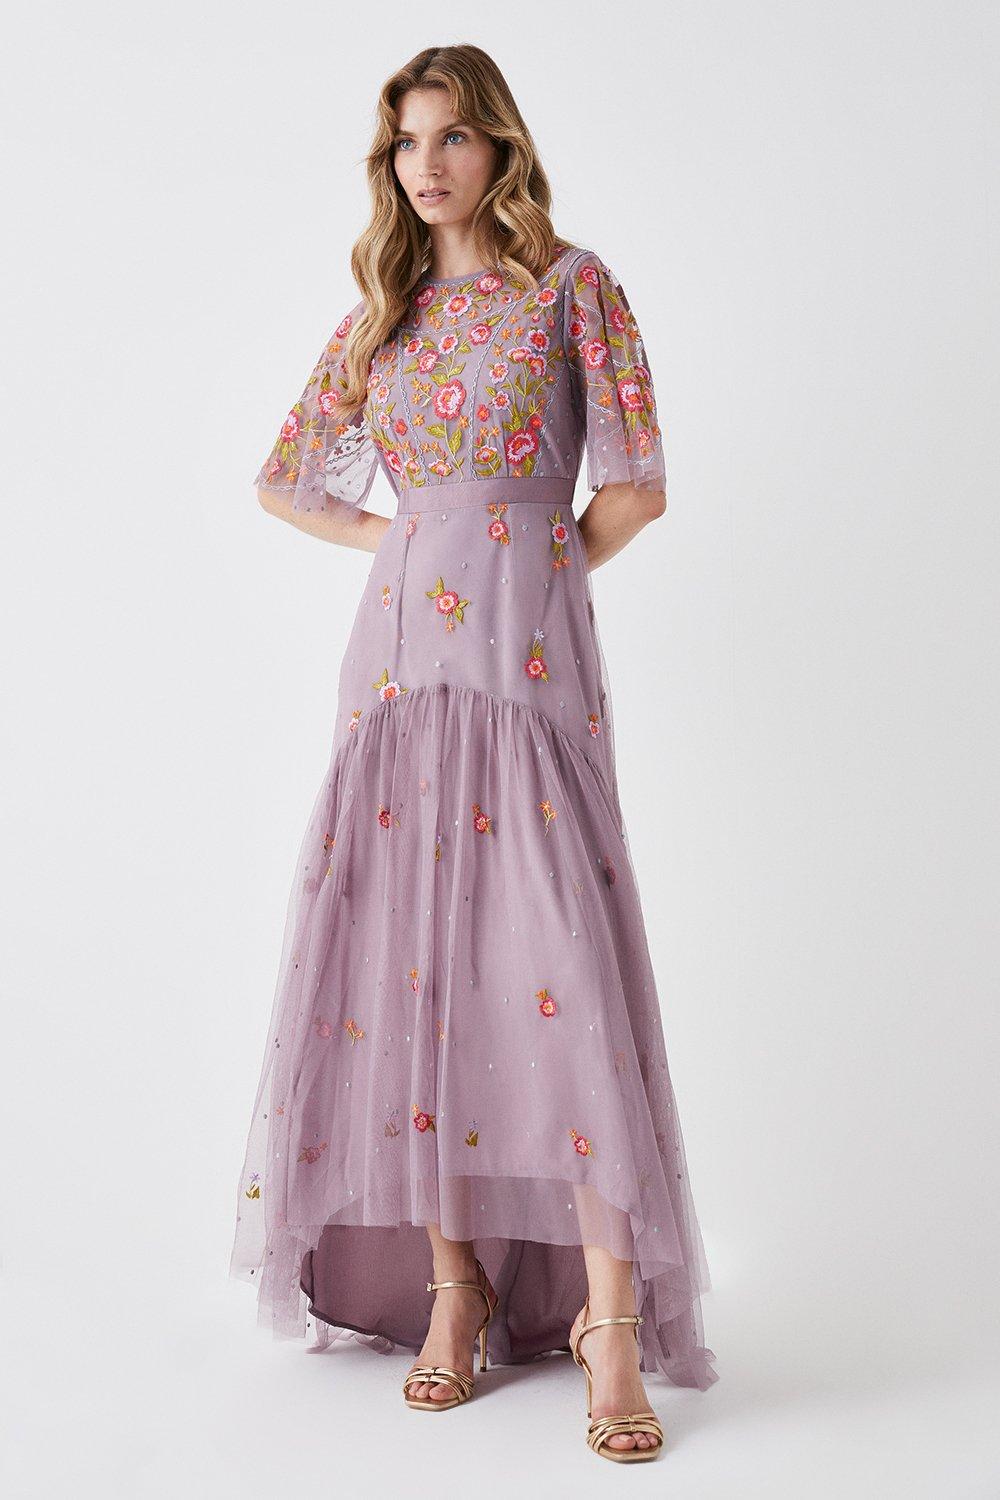 Panelled Skirt Hand Embroidered Maxi Dress - Lilac